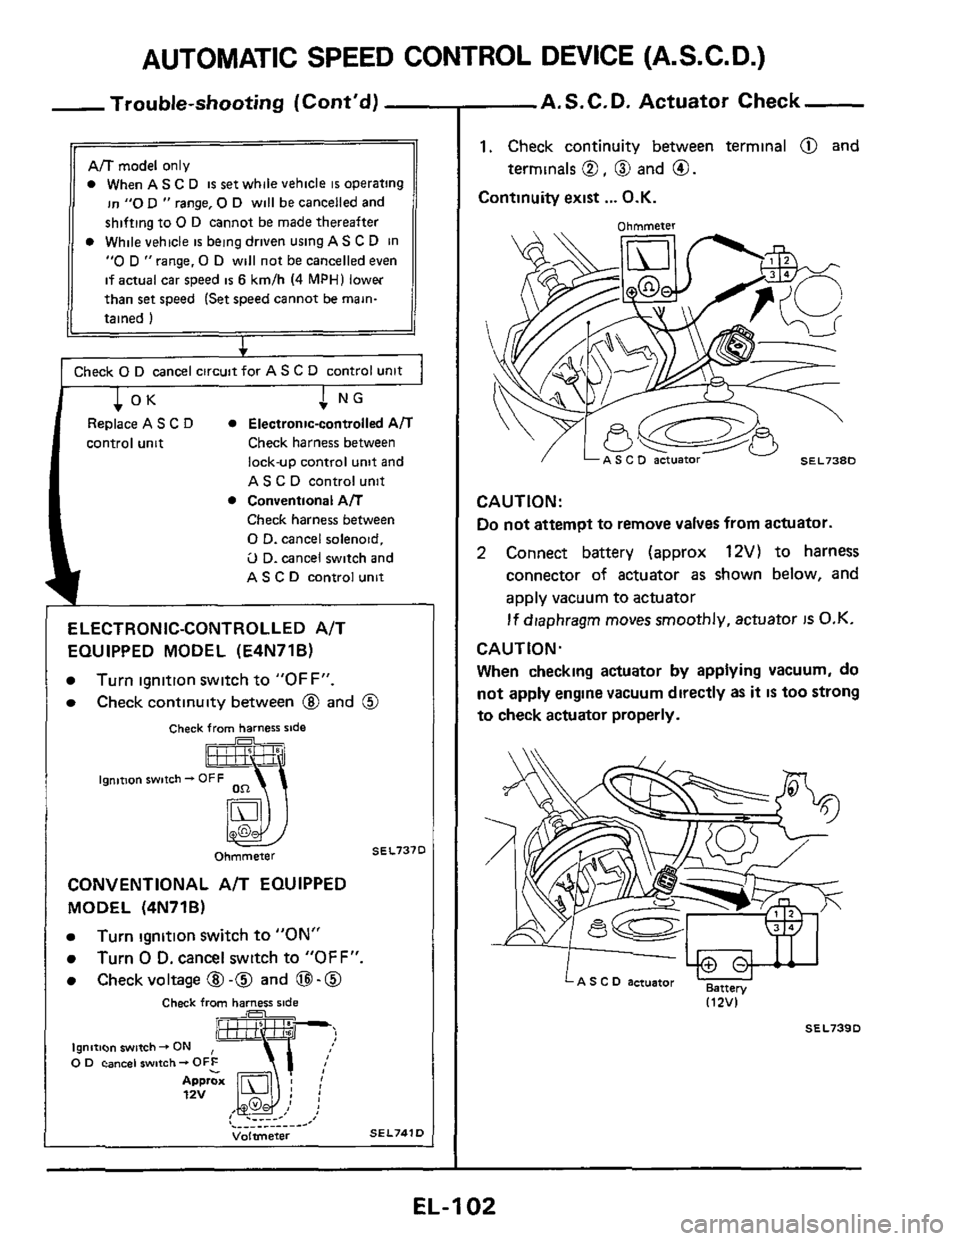 NISSAN 300ZX 1984 Z31 Electrical System Workshop Manual AUTOMATIC SPEED  CONTROL  DEVICE (A.S.C.D.) 
- Trouble-shooting (Contd) 
AIT model only 
0 When A S C D is set while vehicle is operating 
in 
"0 D " range, 0 D will  be cancelled  and 
shifting  to 